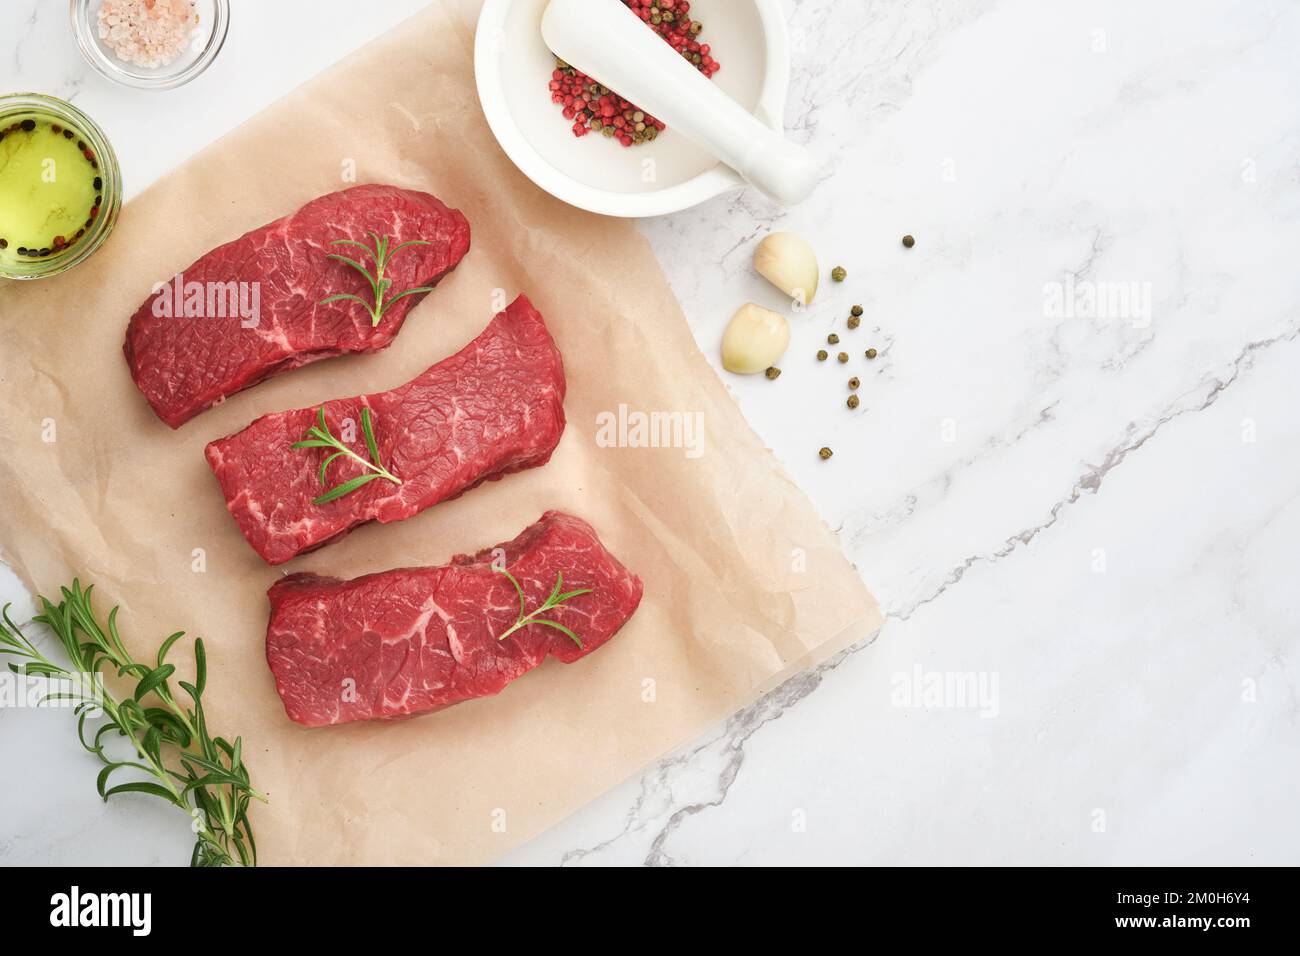 Raw steaks. Top blade steaks on wood burning board with spices, rosemary, vegetables and ingredients for cooking on parchment paper on white backgroun Stock Photo